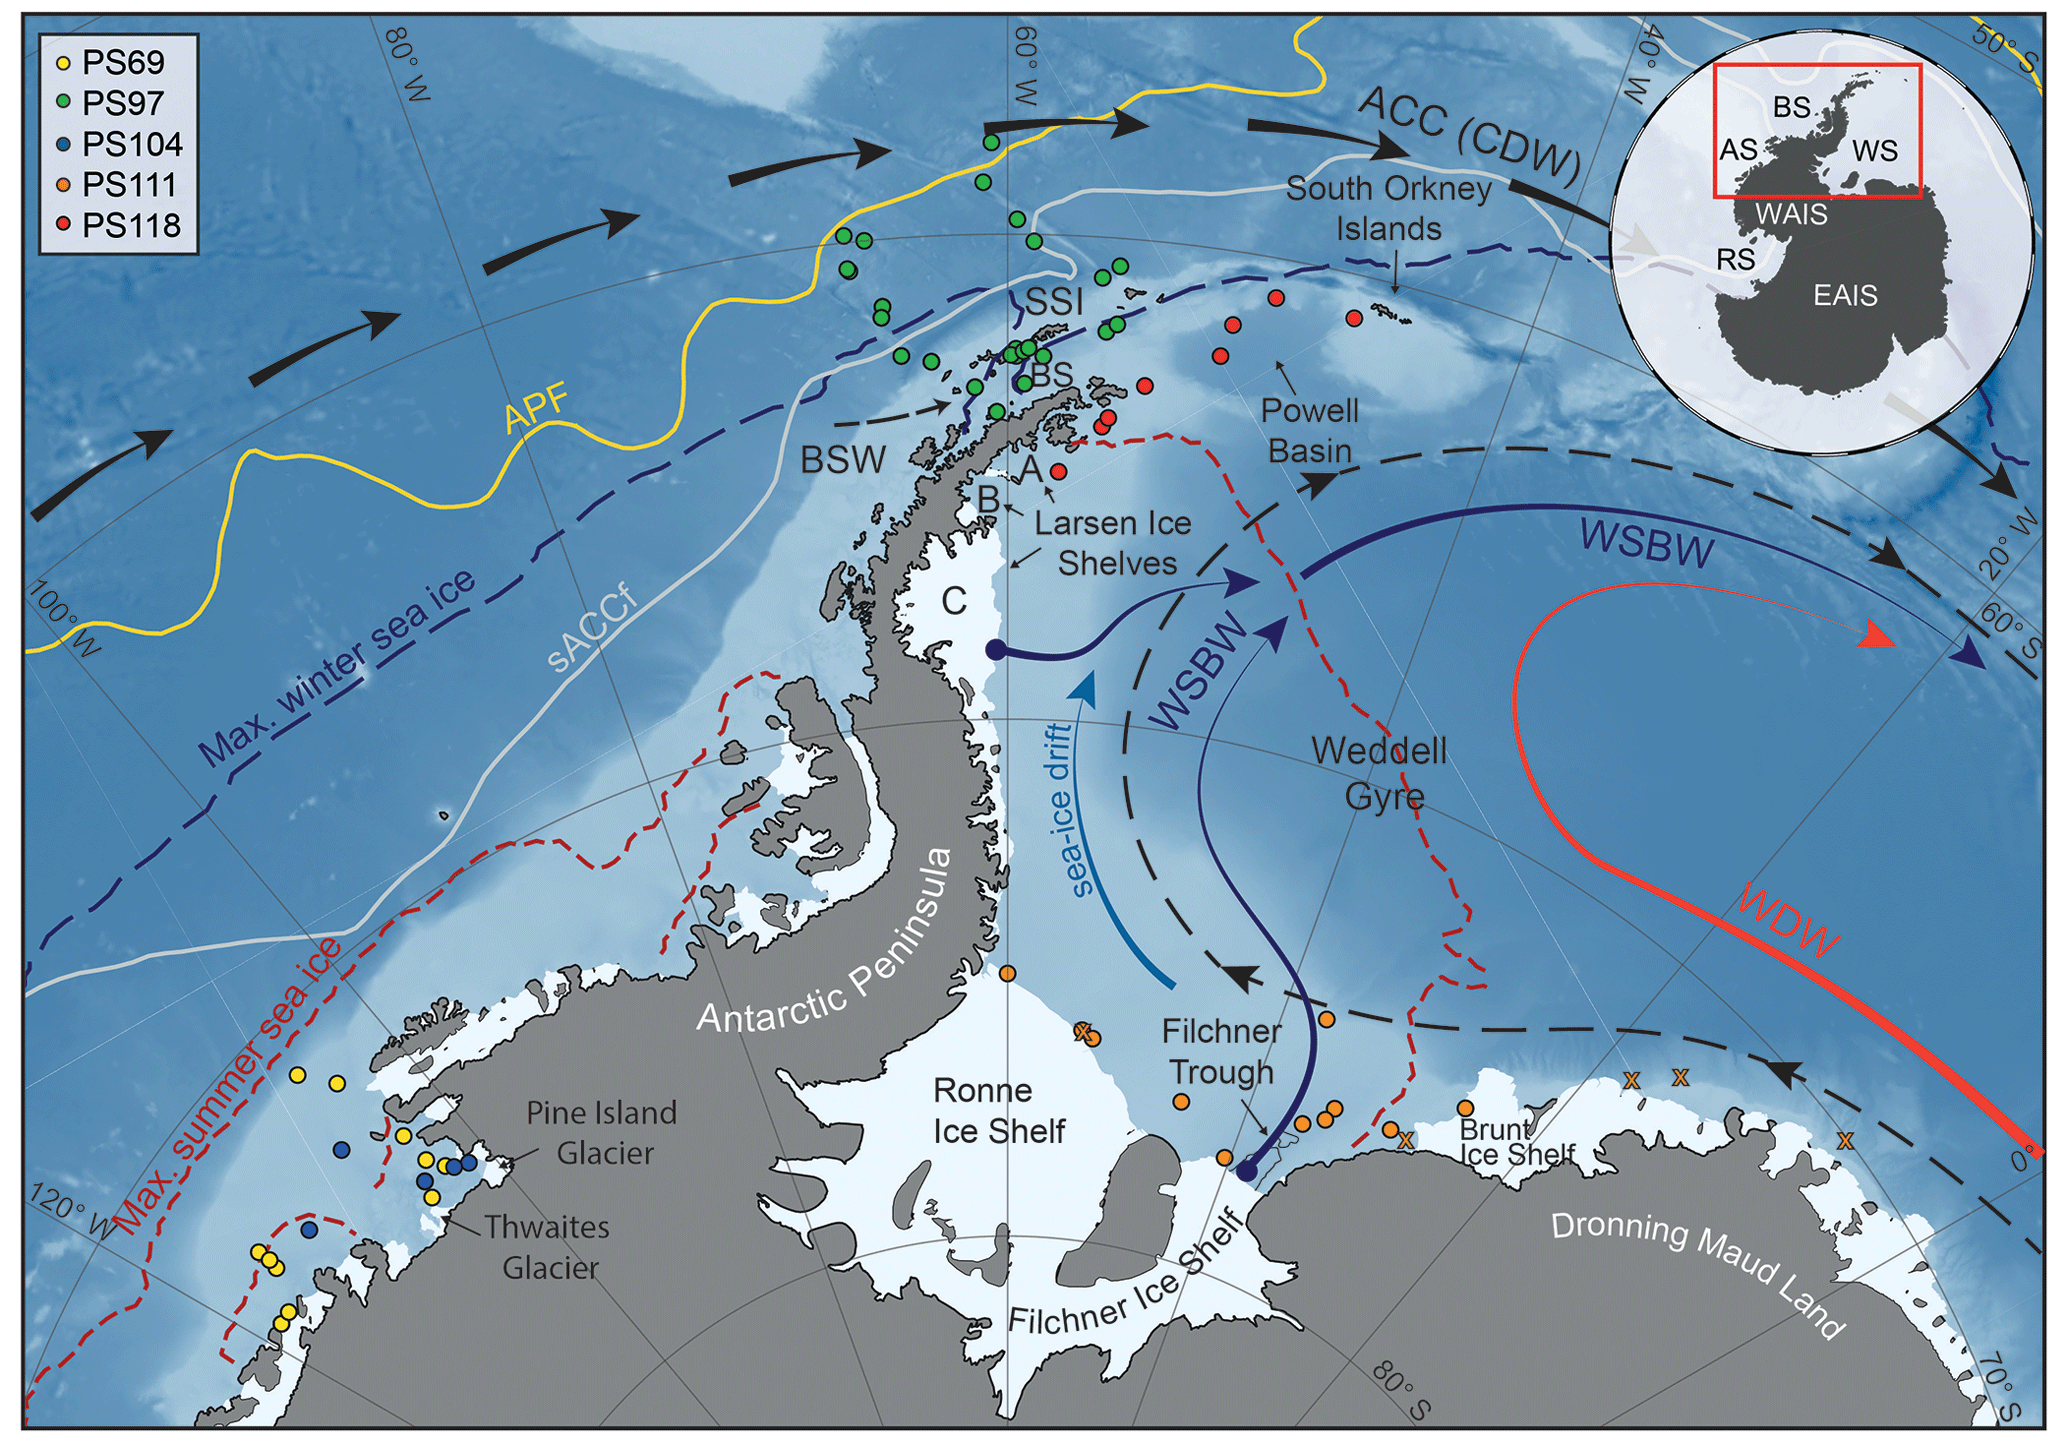 biomarkers as sea ocean continental along CP proxies and margin of Evaluation - lipid temperatures the for ice Antarctic